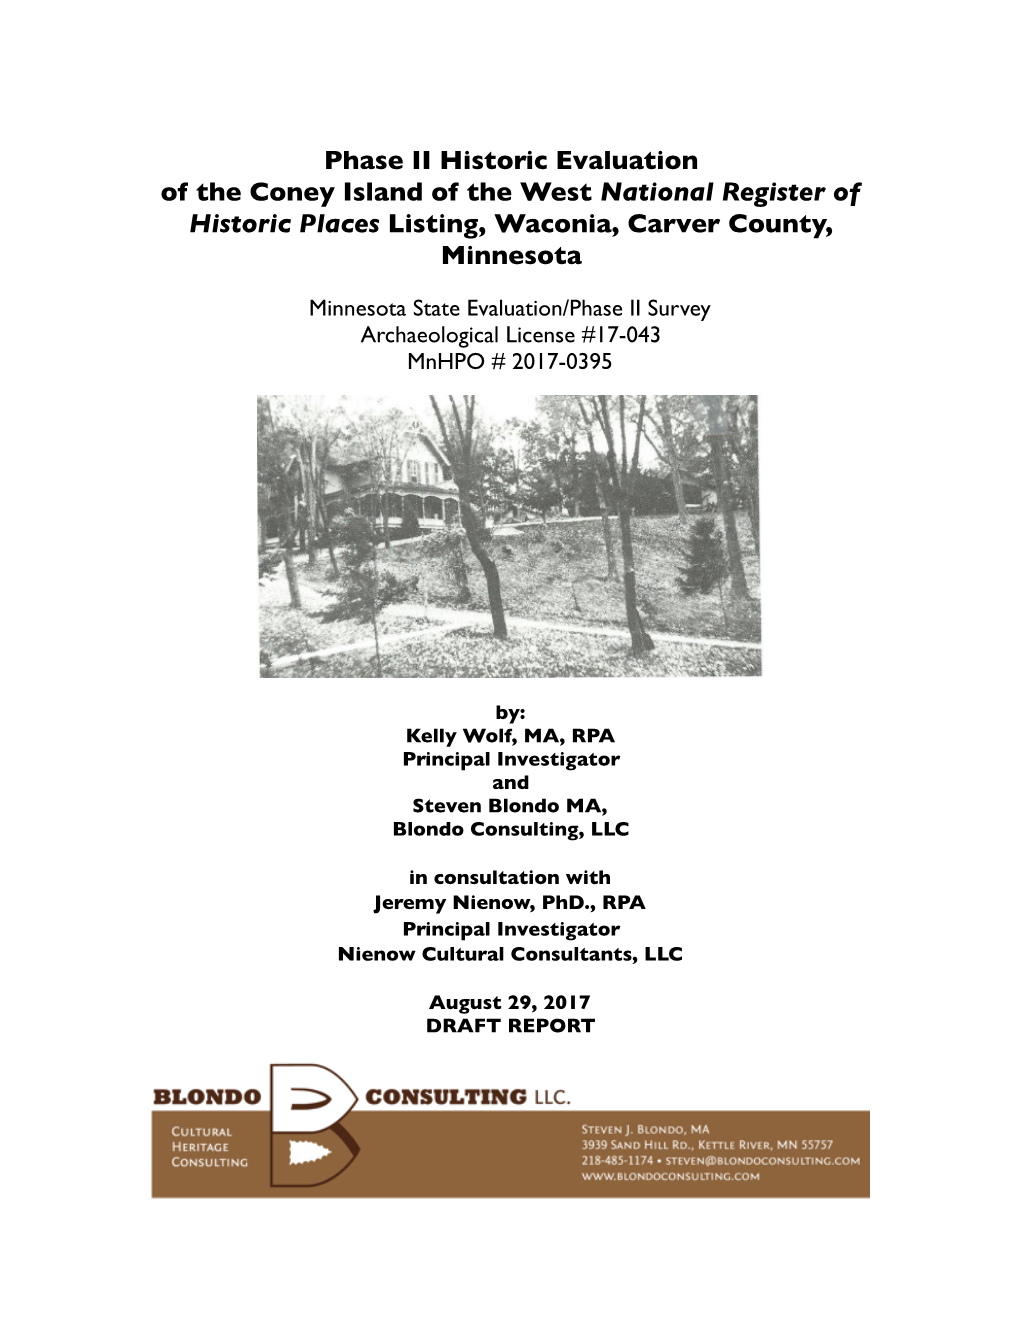 Phase II Historic Evaluation of the Coney Island of the West National Register of Historic Places Listing, Waconia, Carver County, Minnesota